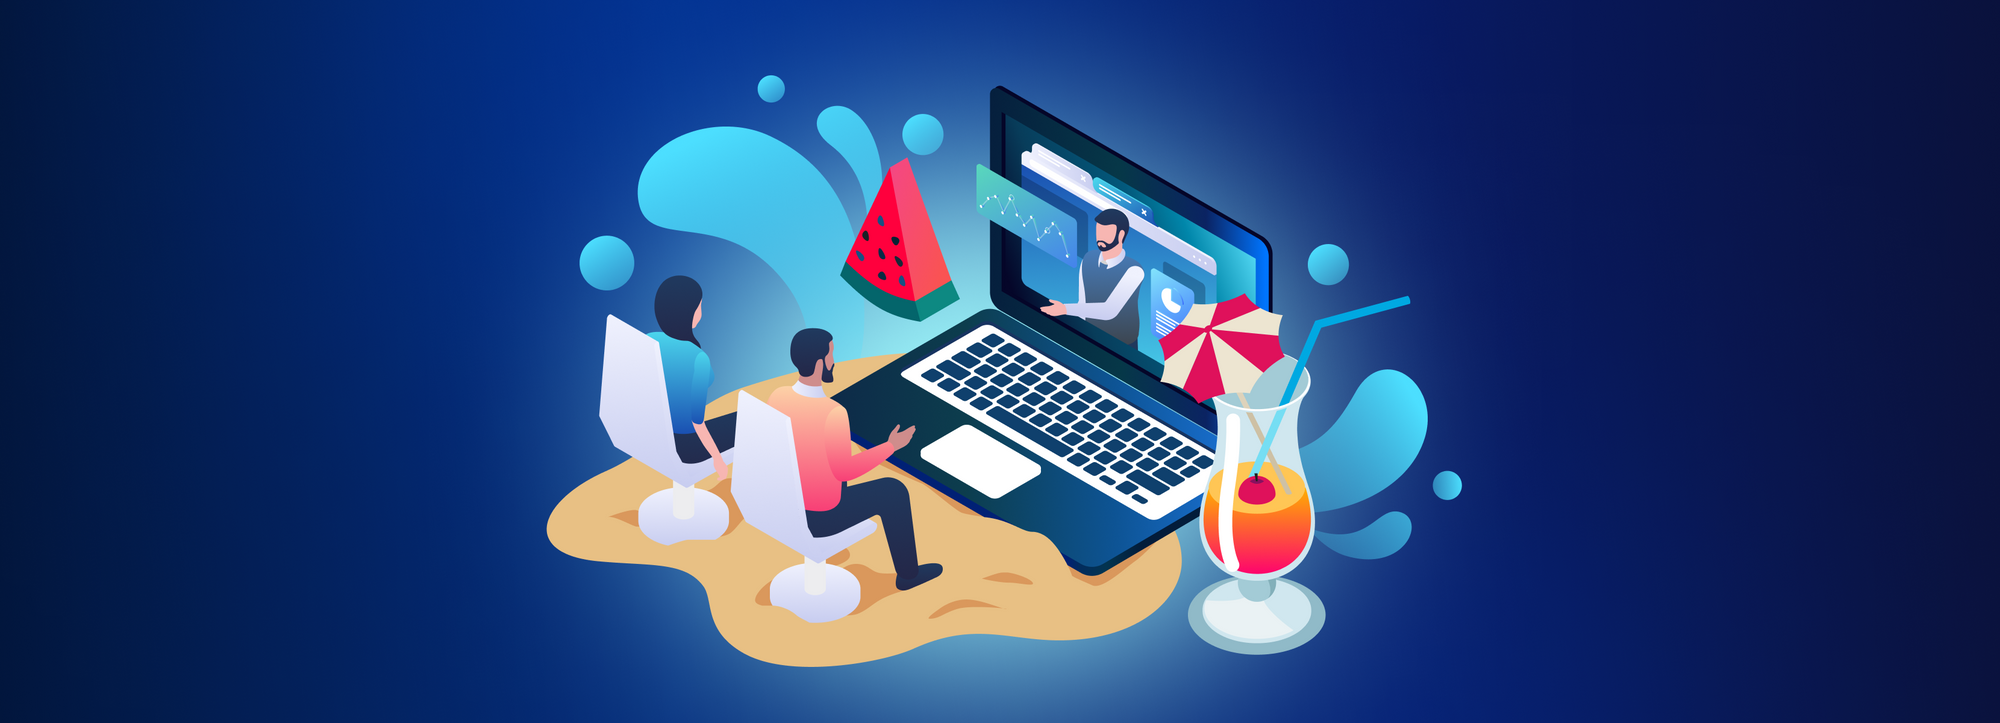 Mix up your workday with Tresorit’s summer cocktail of on-demand webinars